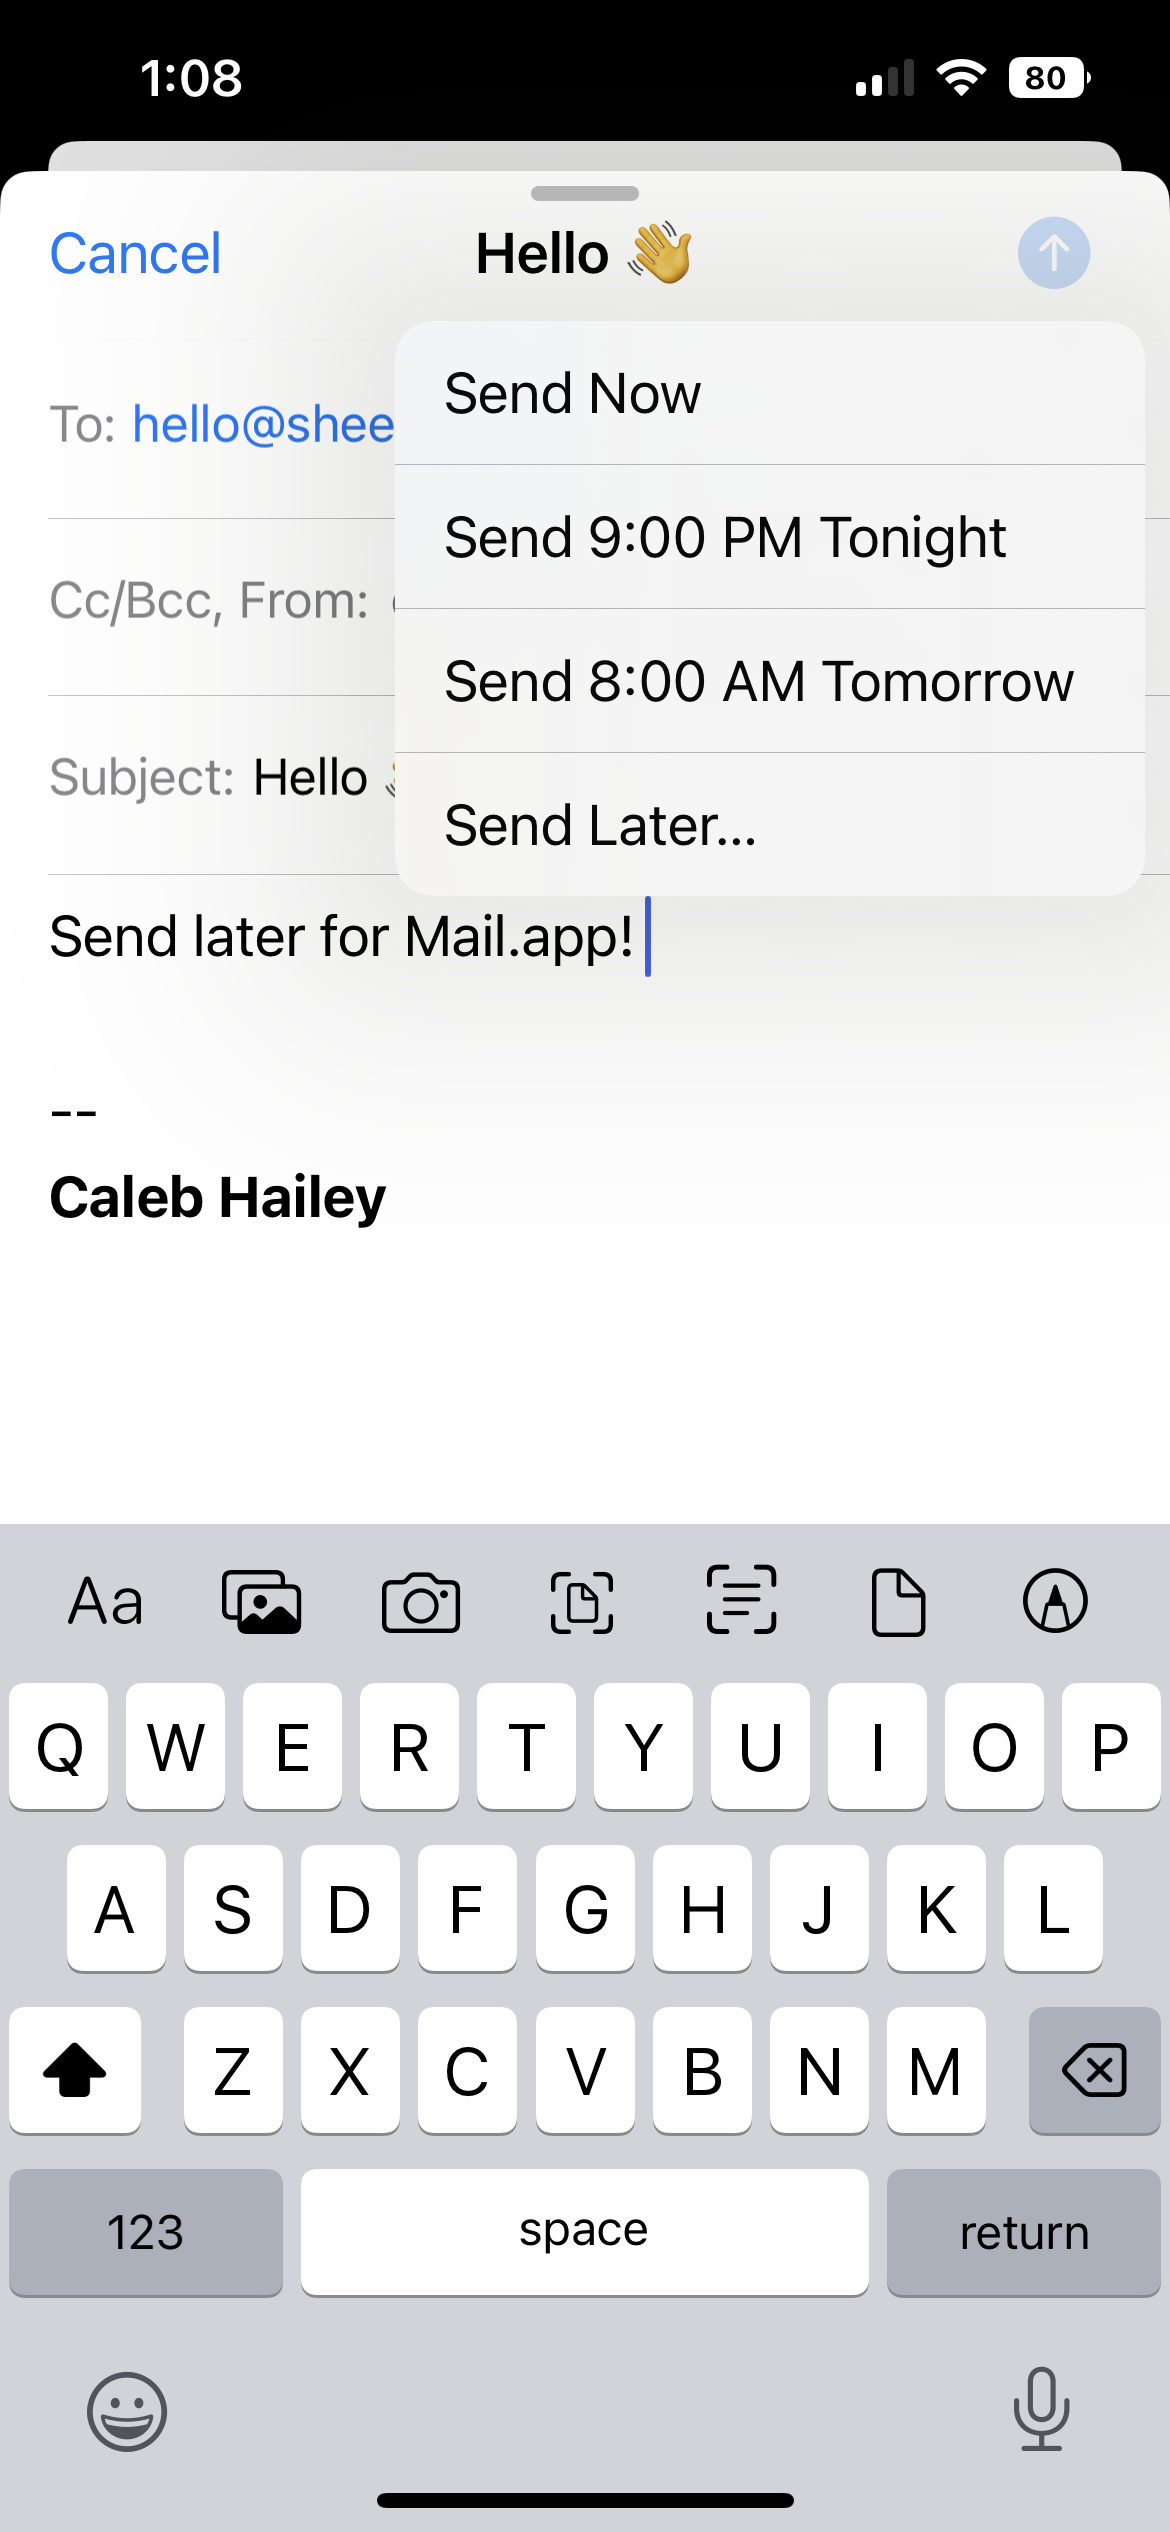 Scheduled send for Mail.app on iPhone (via iOS 16 Beta).